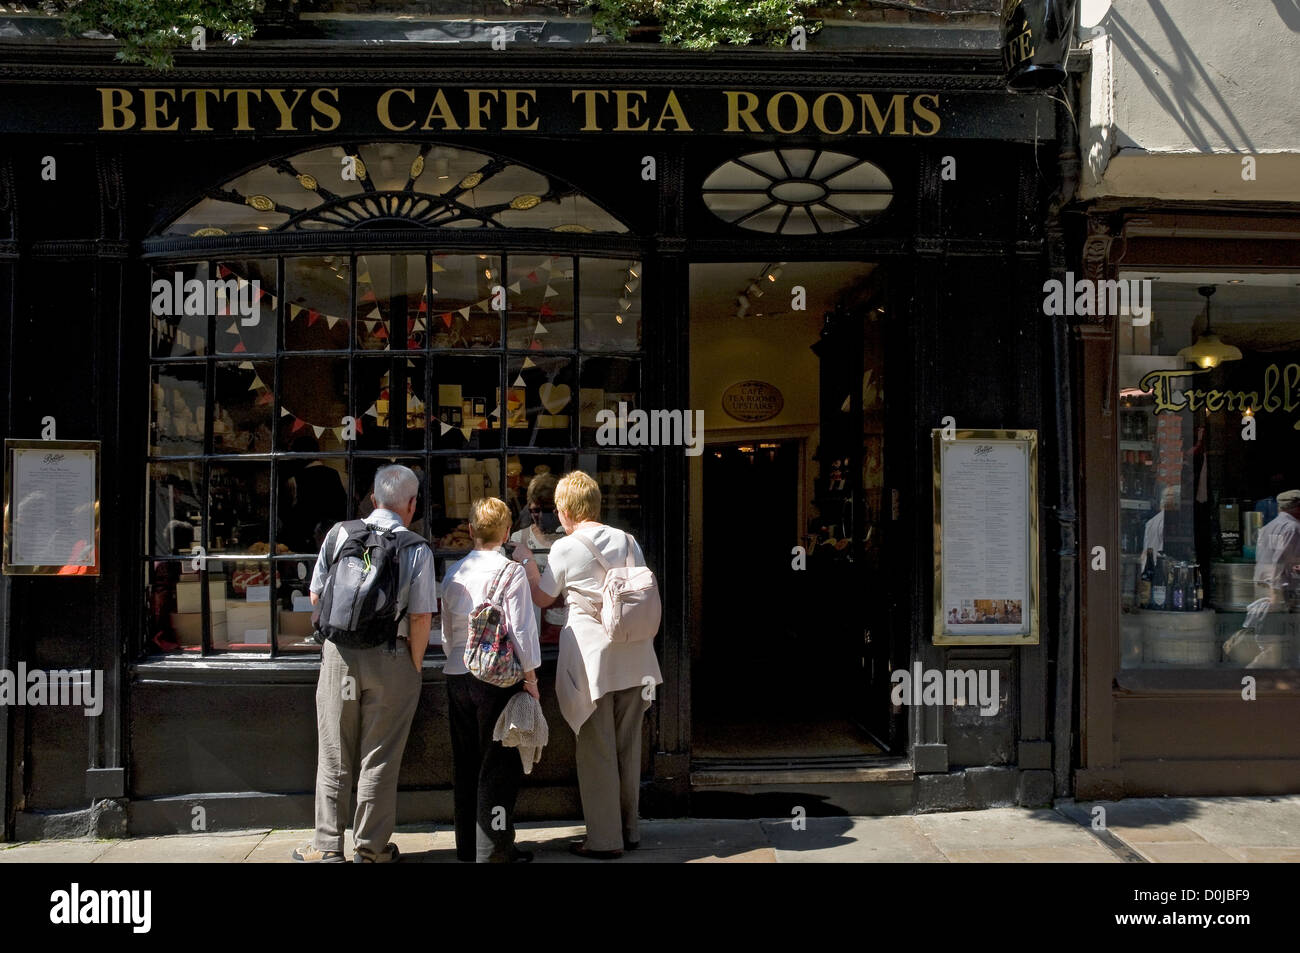 People looking in the window of Little Bettys cafe and tea rooms in Stonegate. Stock Photo